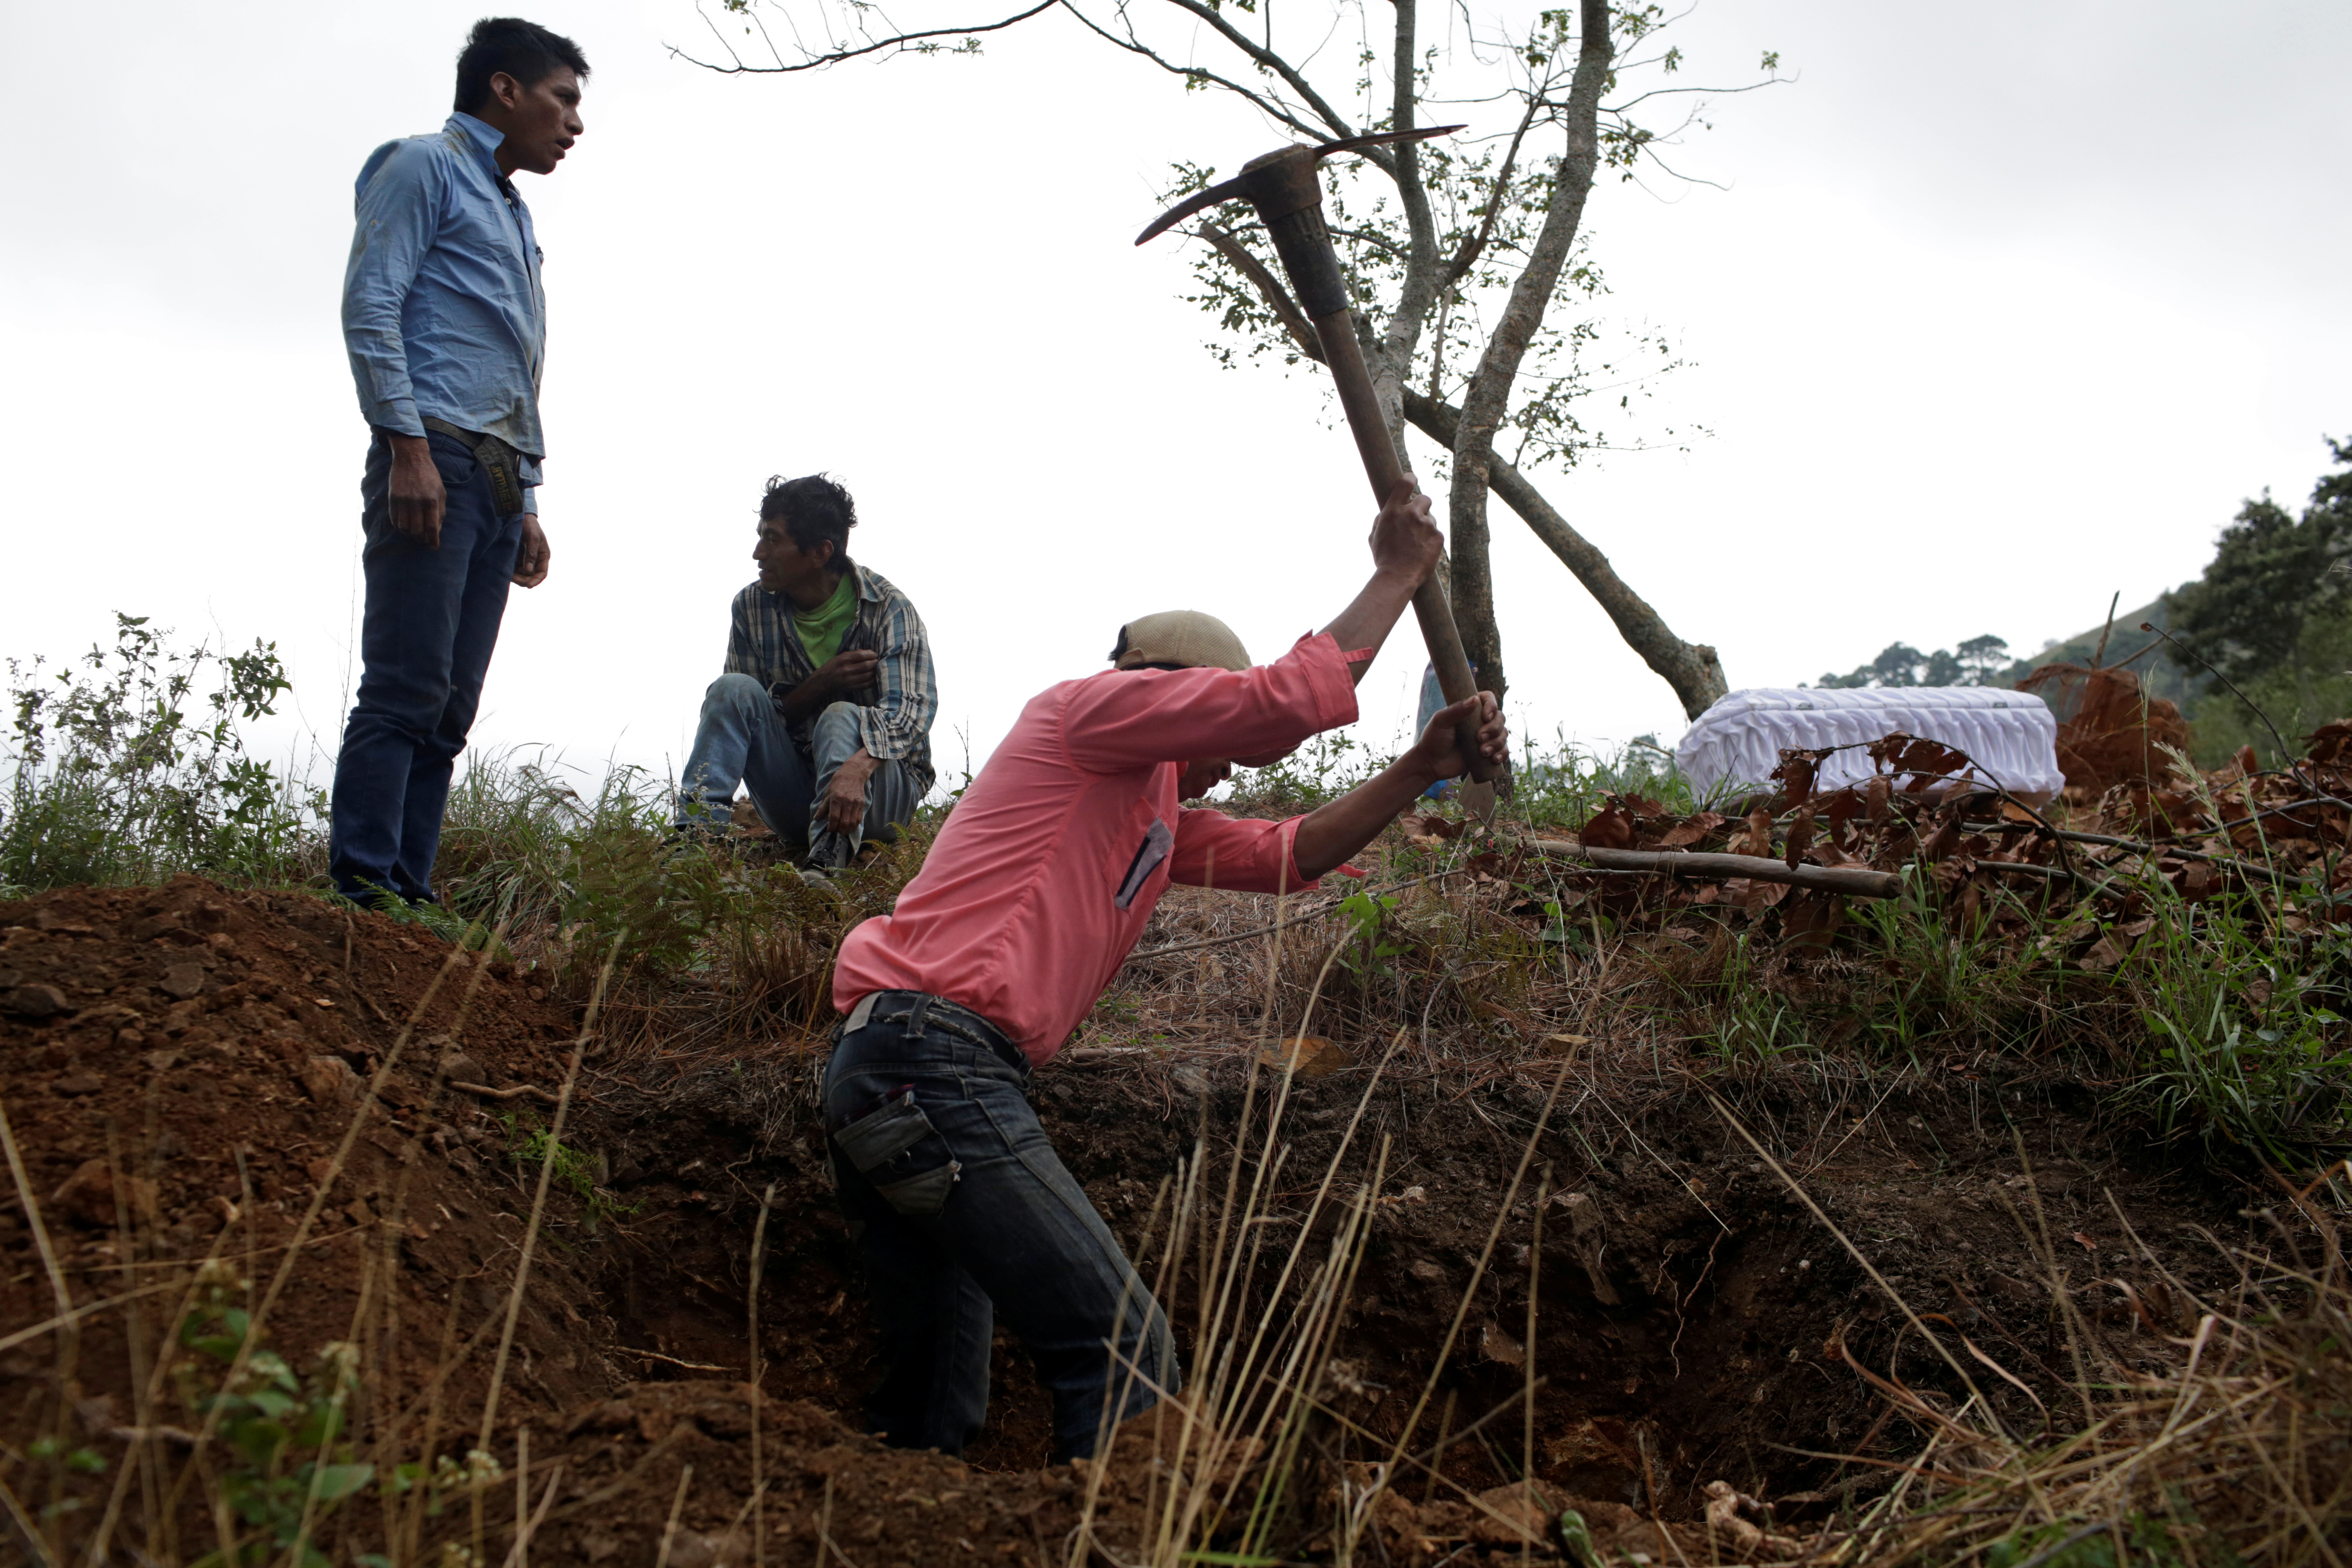 Relatives of late Yesmin Anayeli dig up a grave for her burial at a hilltop in La Palmilla